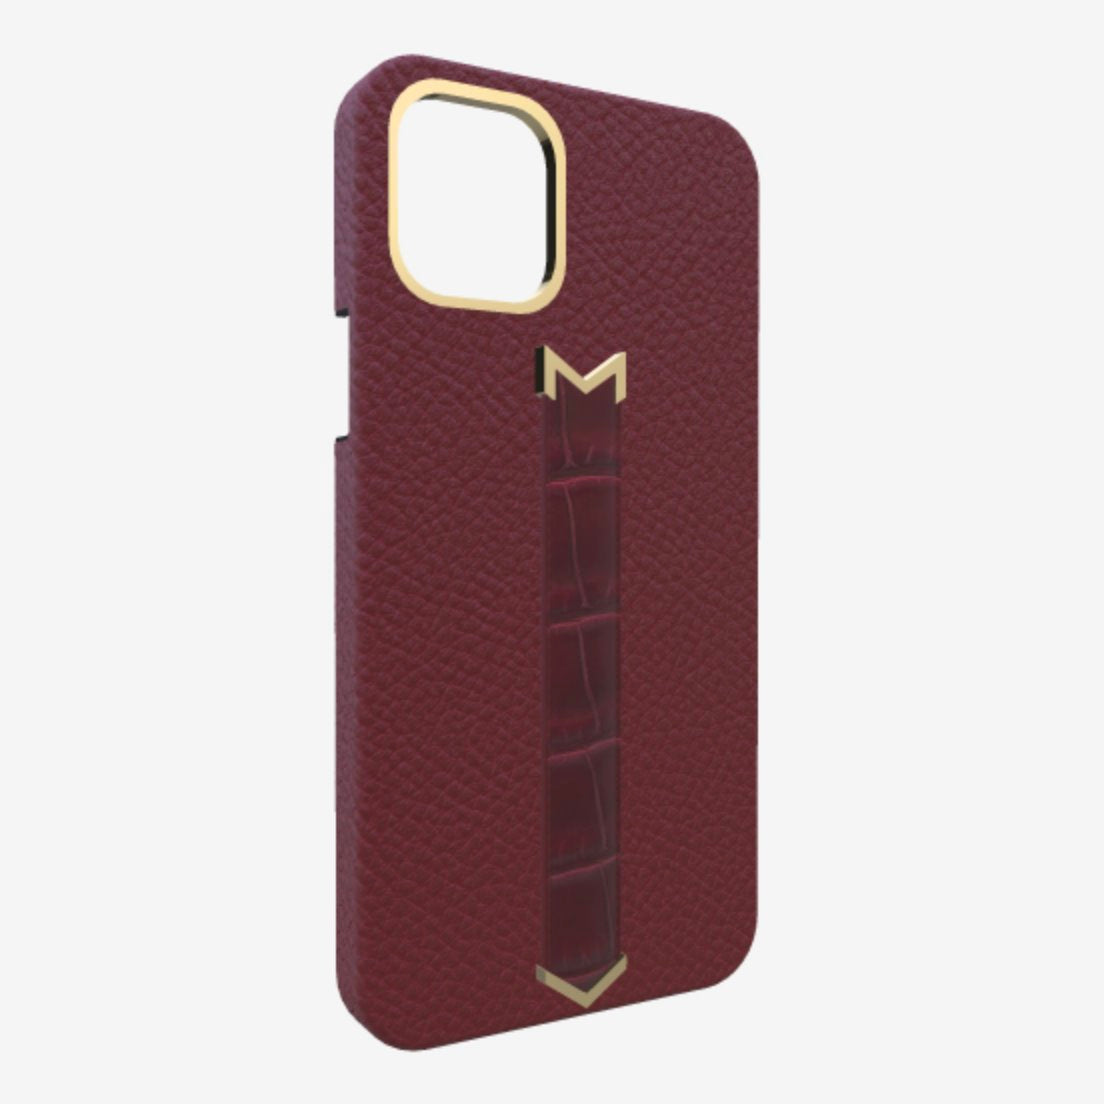 Gold Finger Strap Case for iPhone 13 Pro in Genuine Calfskin and Alligator Burgundy Palace Burgundy Palace 